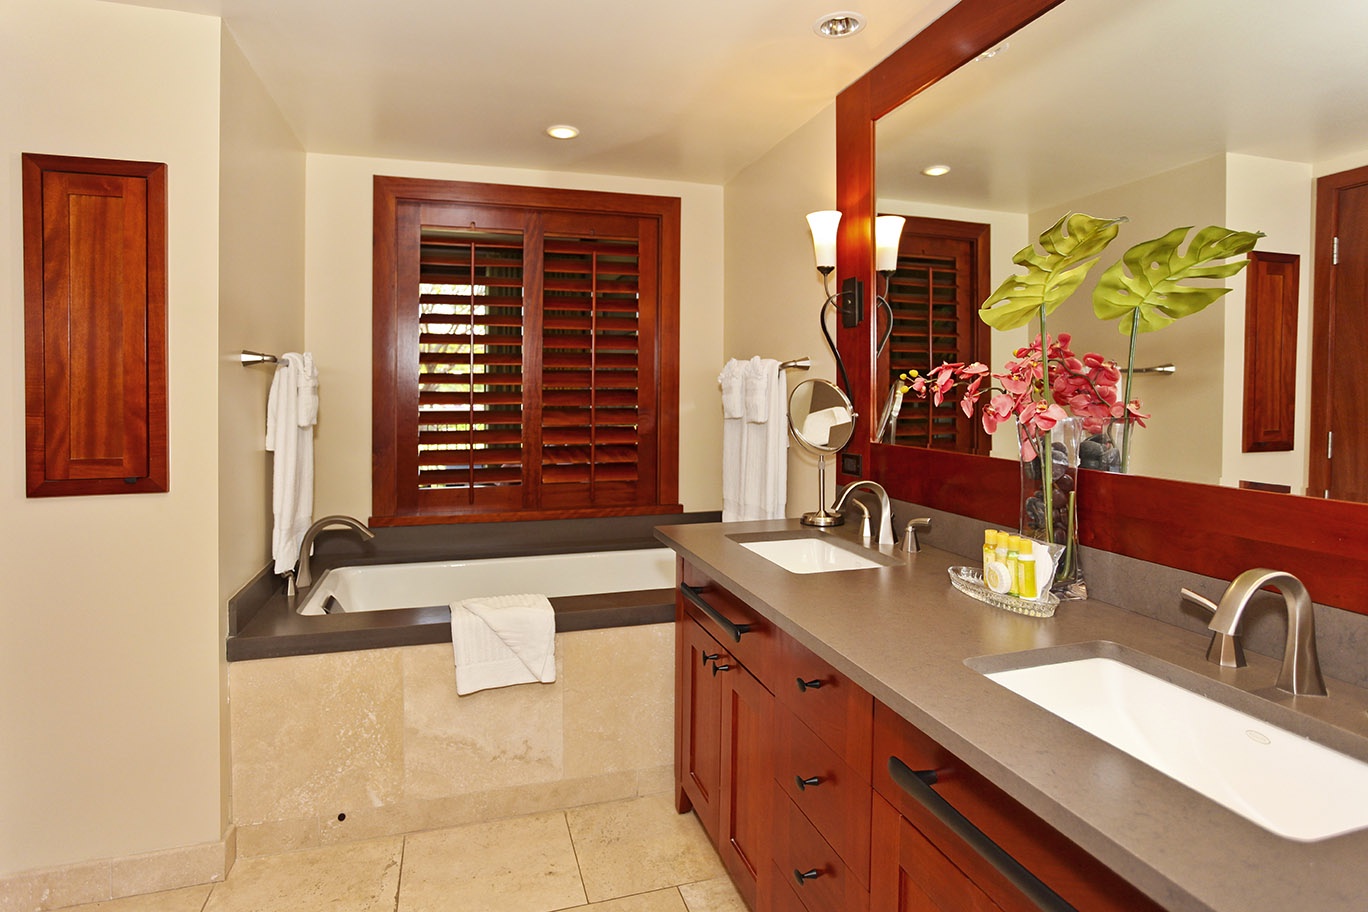 Kapolei Vacation Rentals, Ko Olina Beach Villas B204 - The primary guest bath with a double vanity, soaking tub and shower for total relaxation.